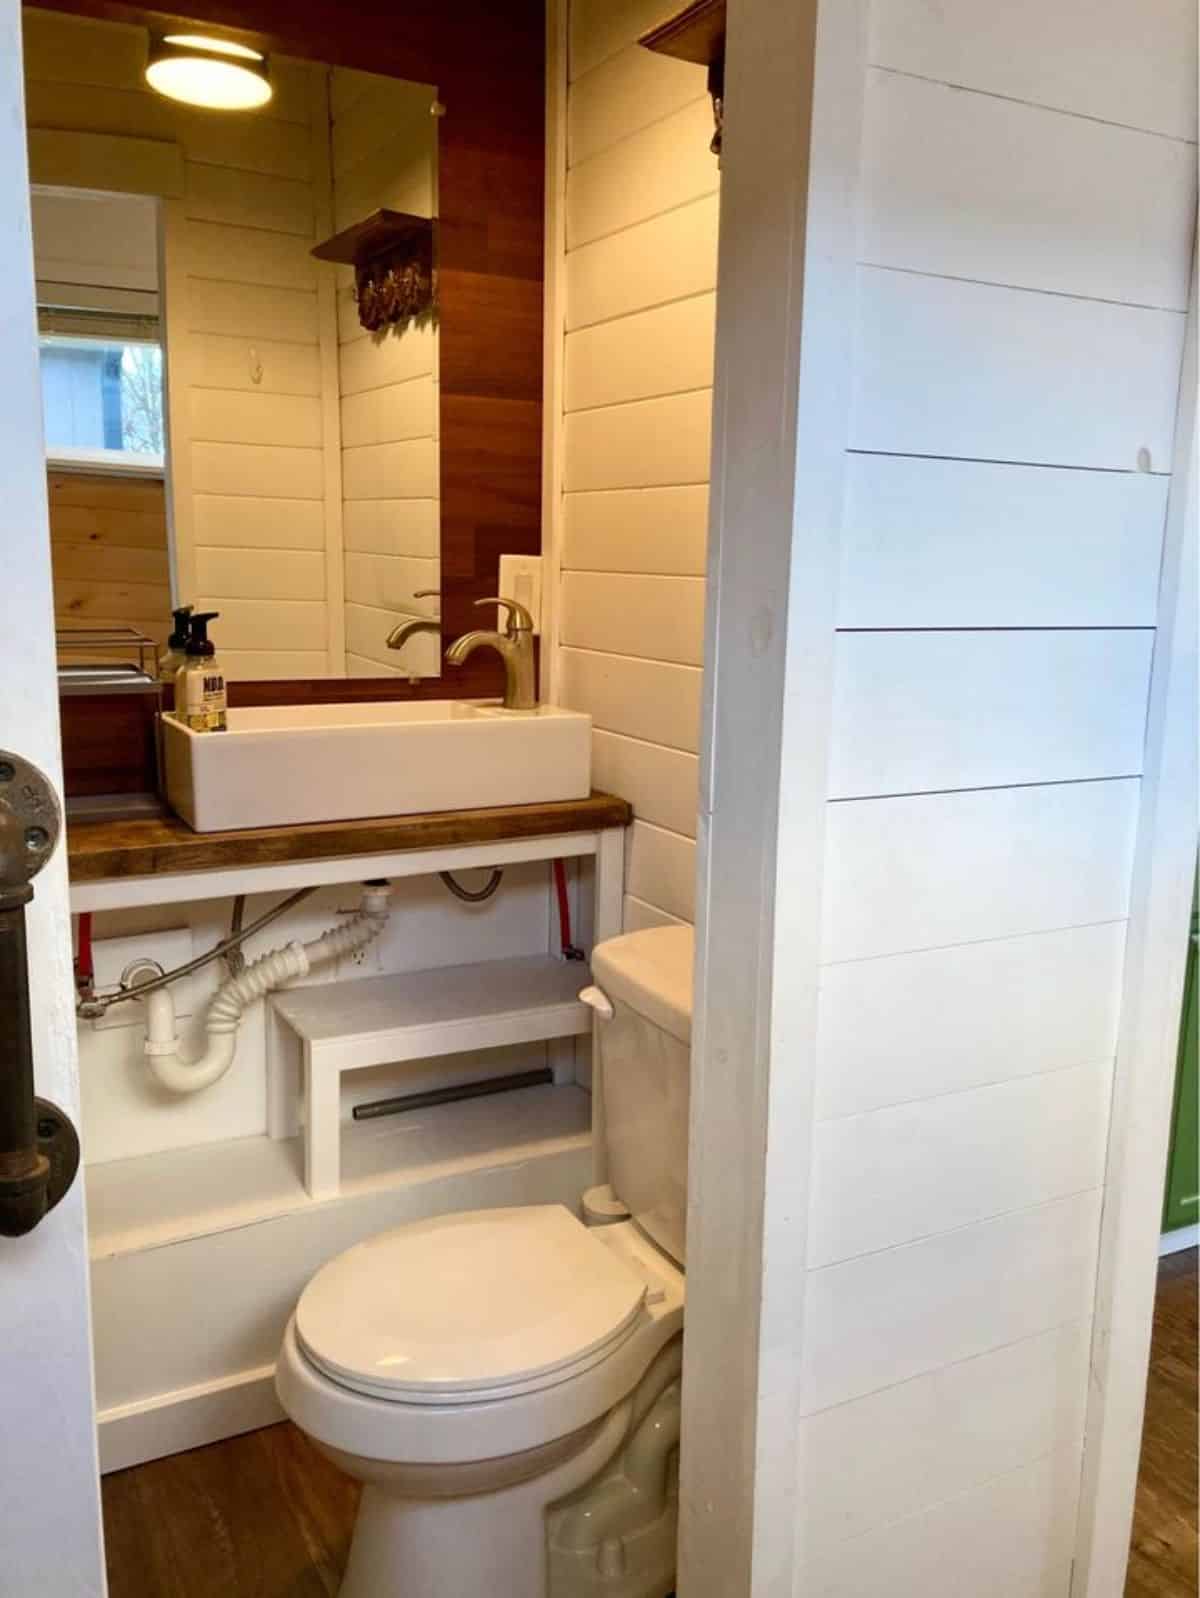 Sink with vanity & mirror and standard toilet in bathroom of 25' Beautiful Tiny Home